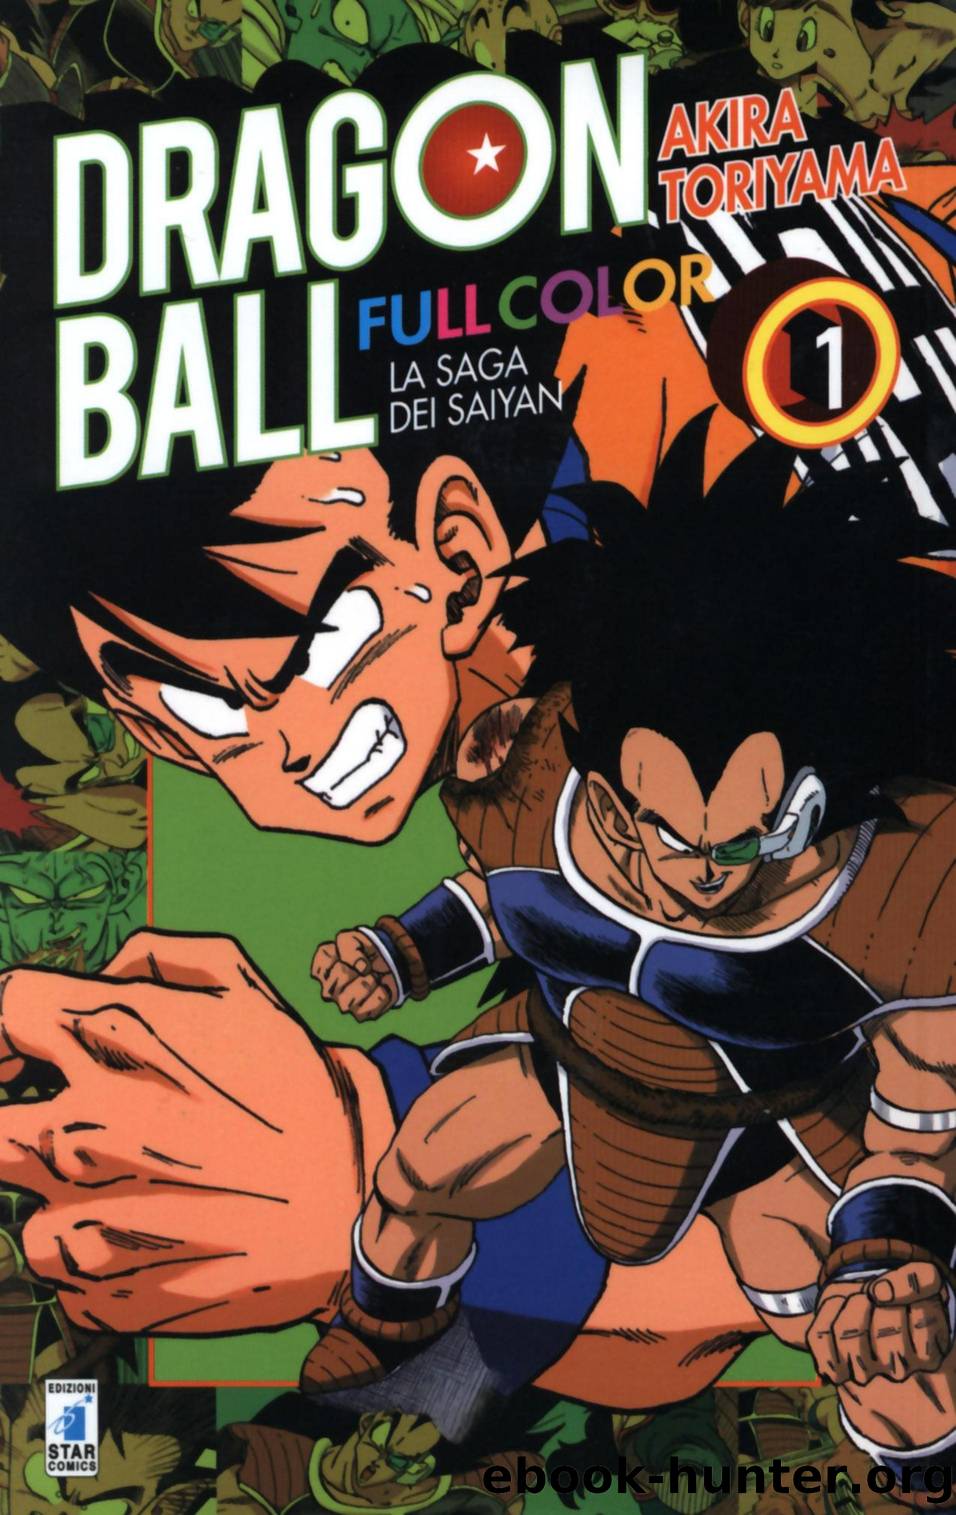 Dragon Ball Full Color [Volume 13] by Unknown